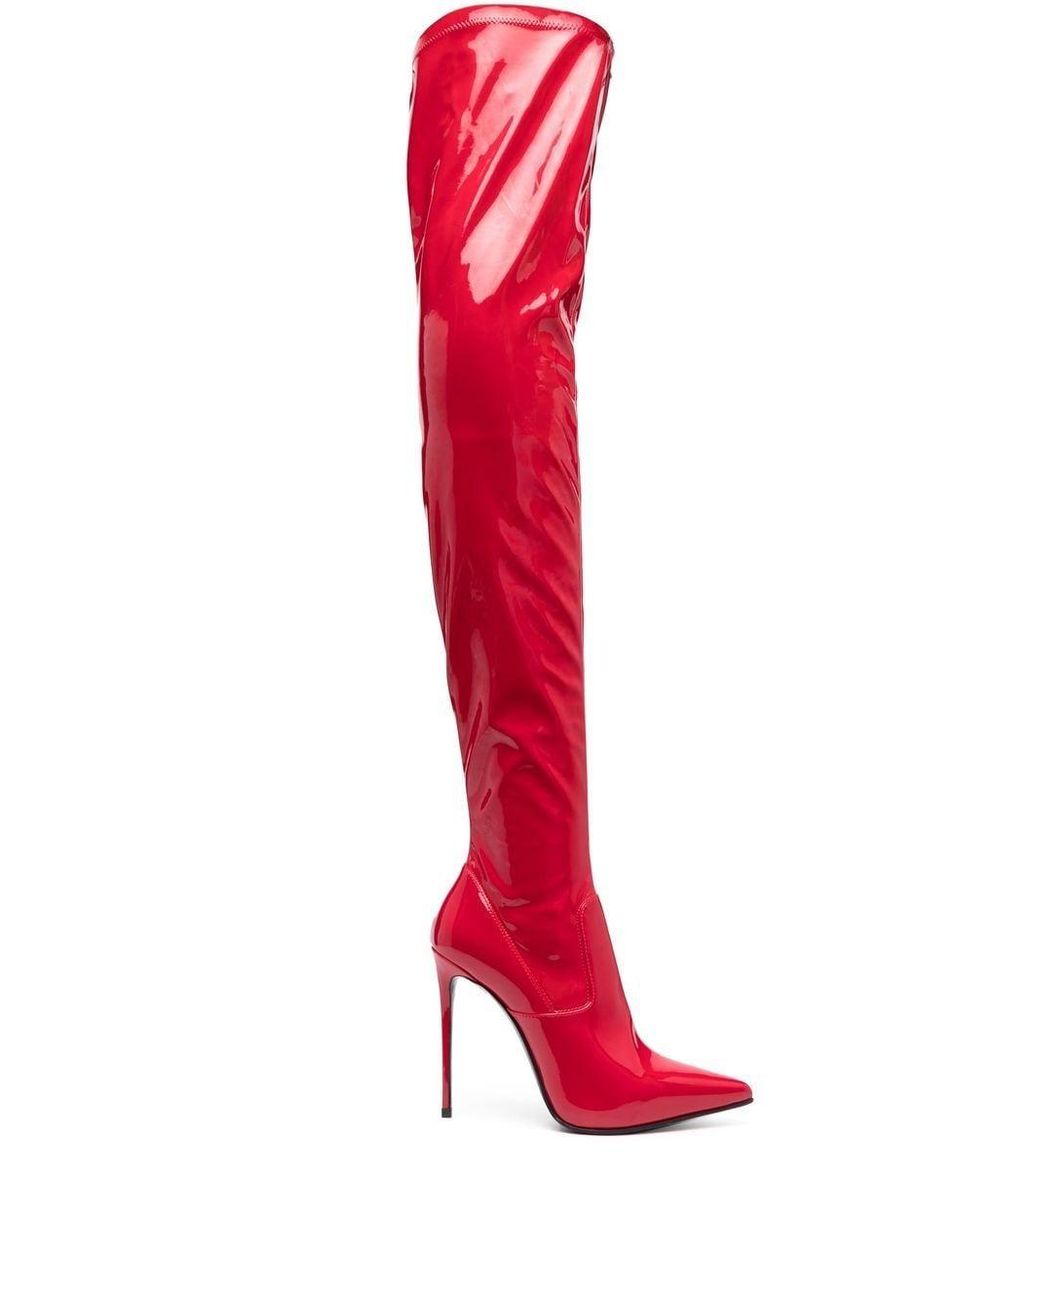 Le Silla Eva Thigh-high Stiletto Boots in Red | Lyst